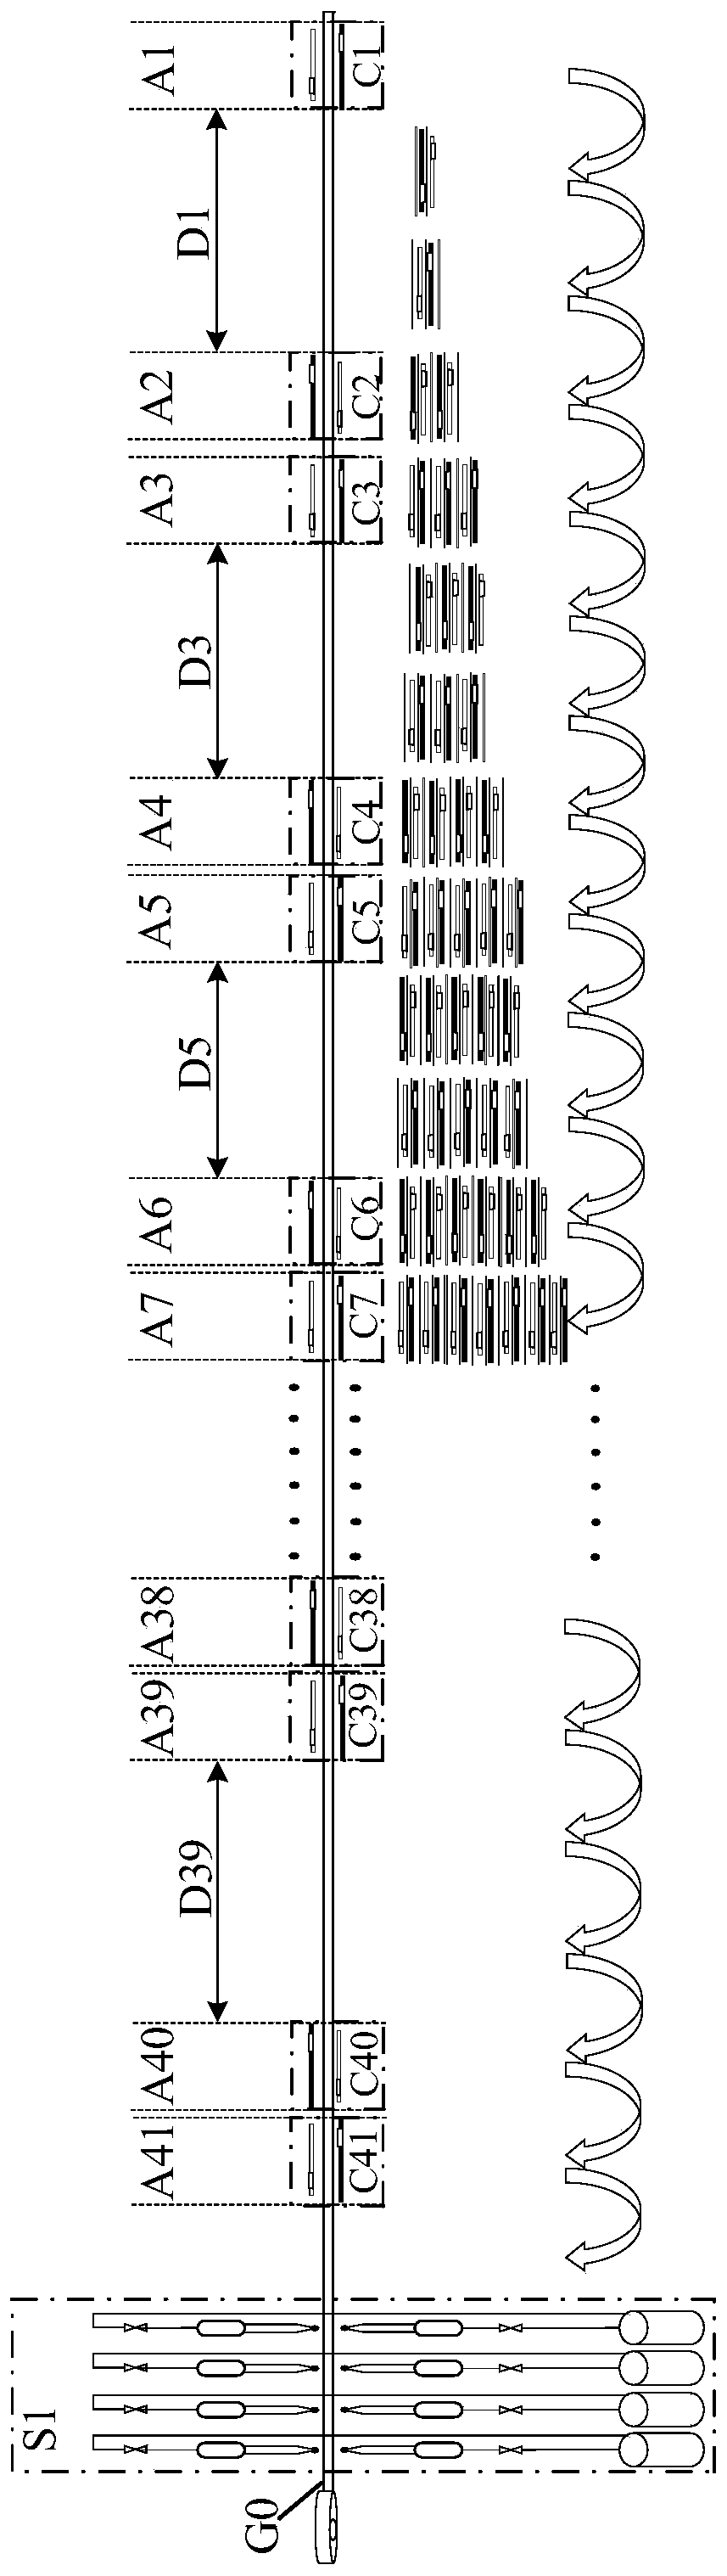 Battery core manufacturing method and system